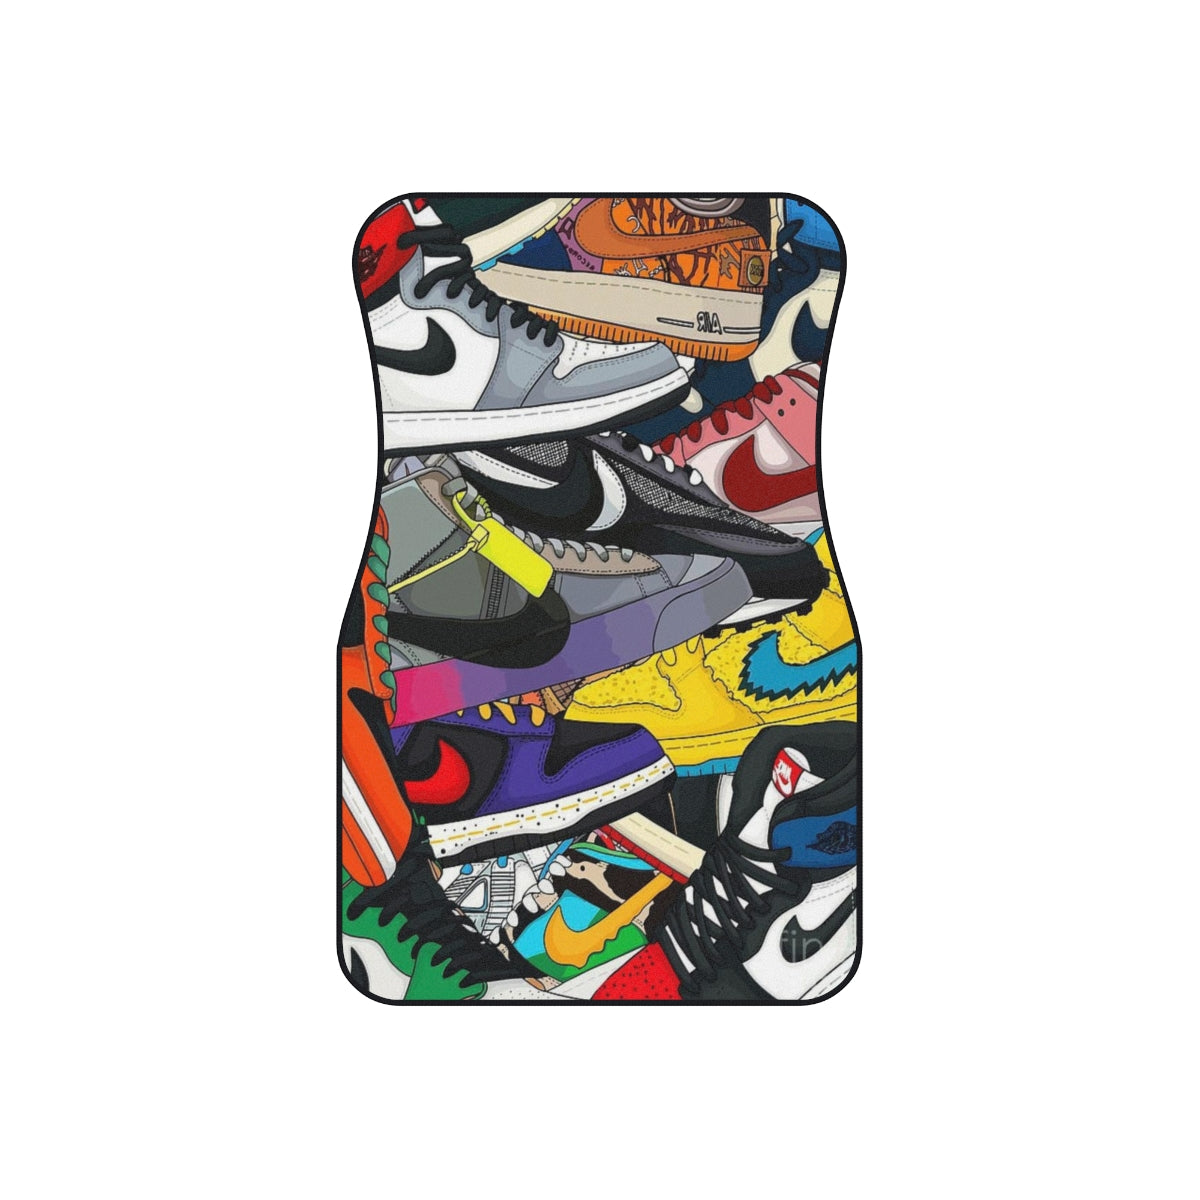 Contrast Clothing Worthing Nike sneaker car mats SNKR Head